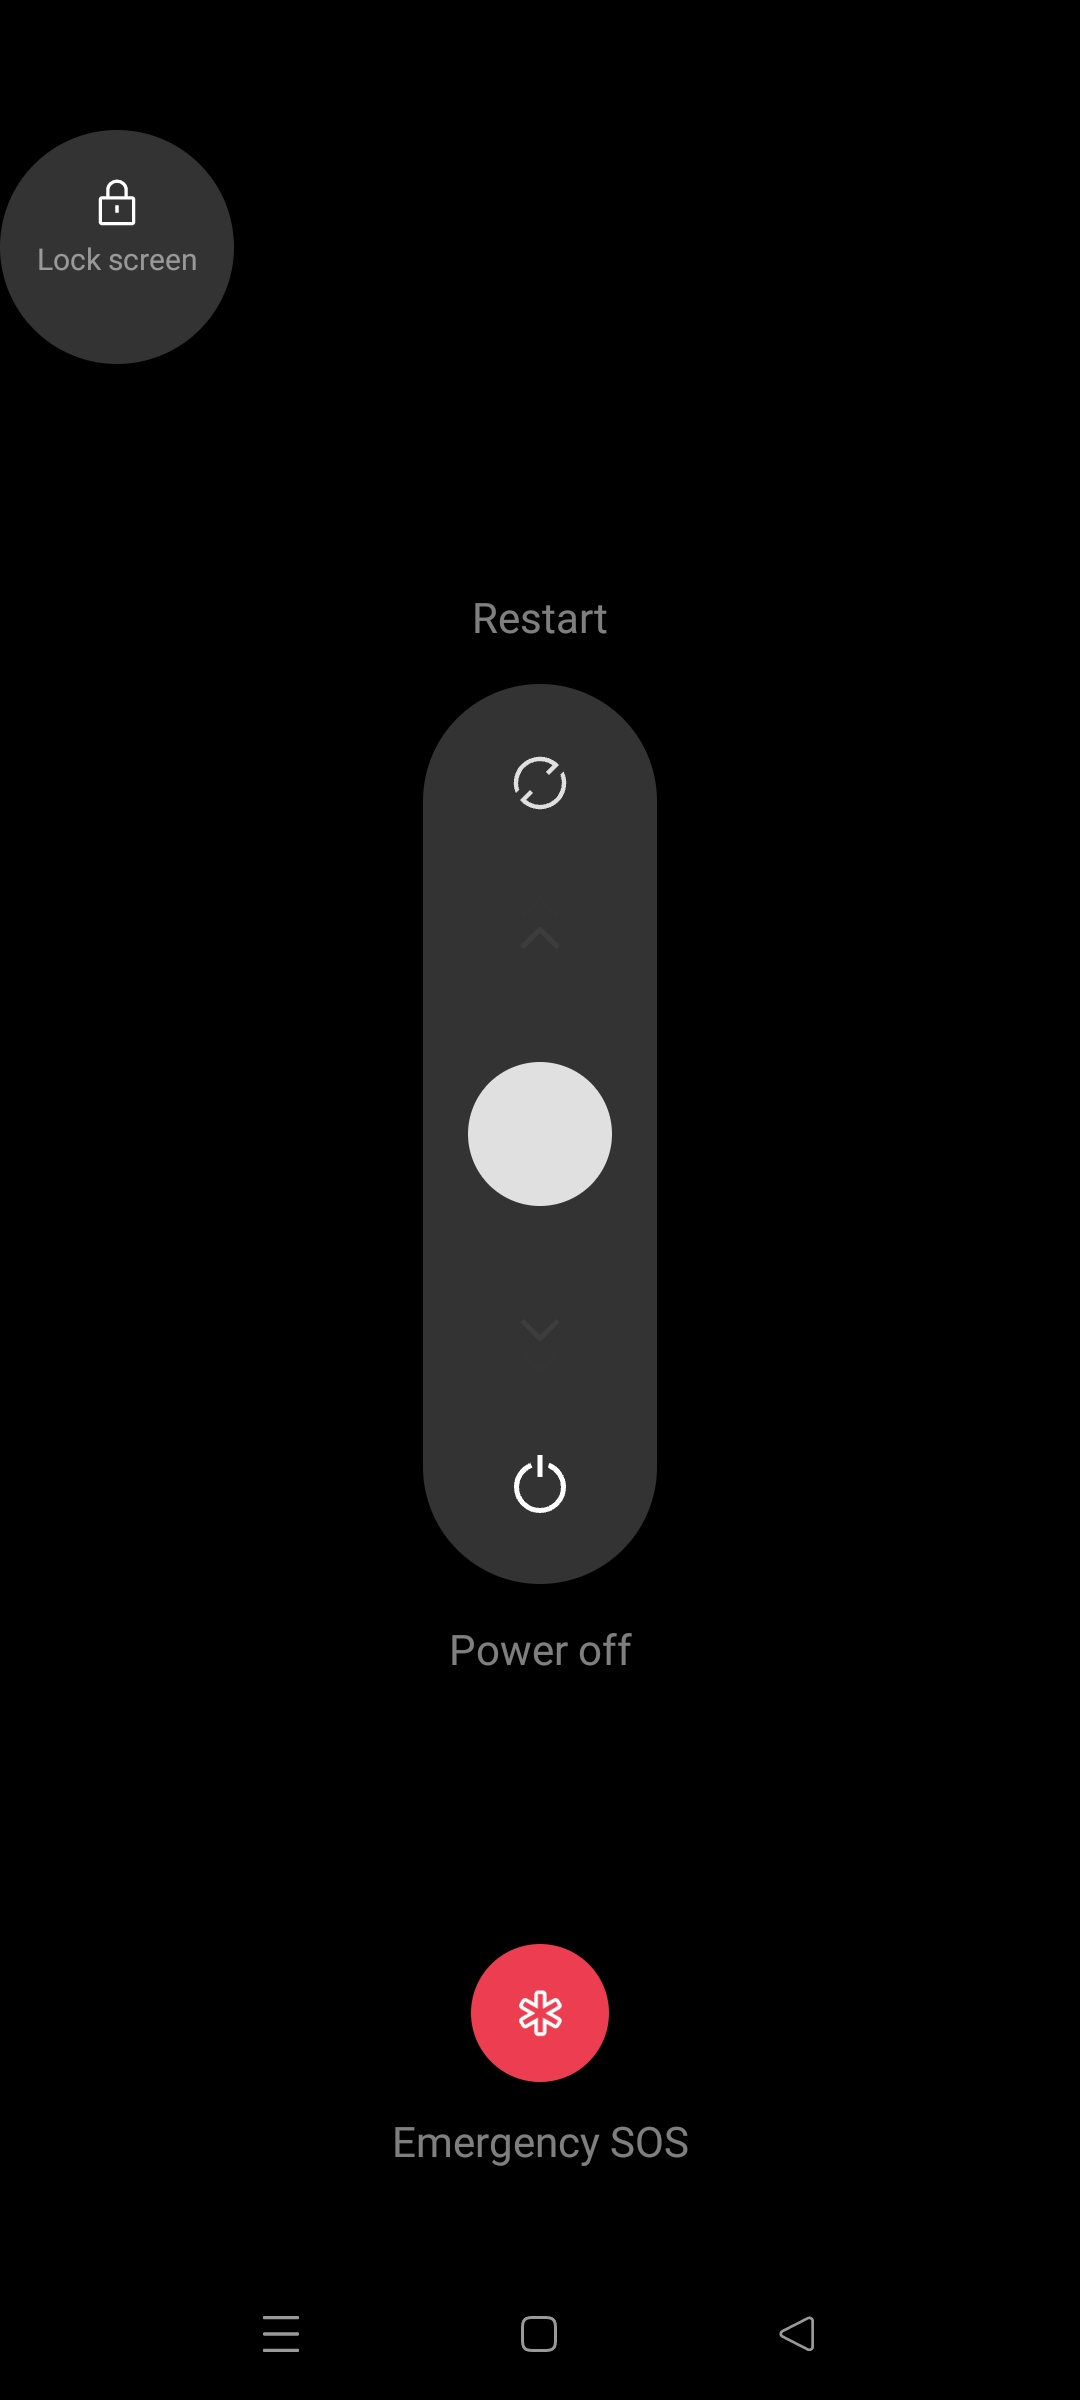 Power Button options screen in Android